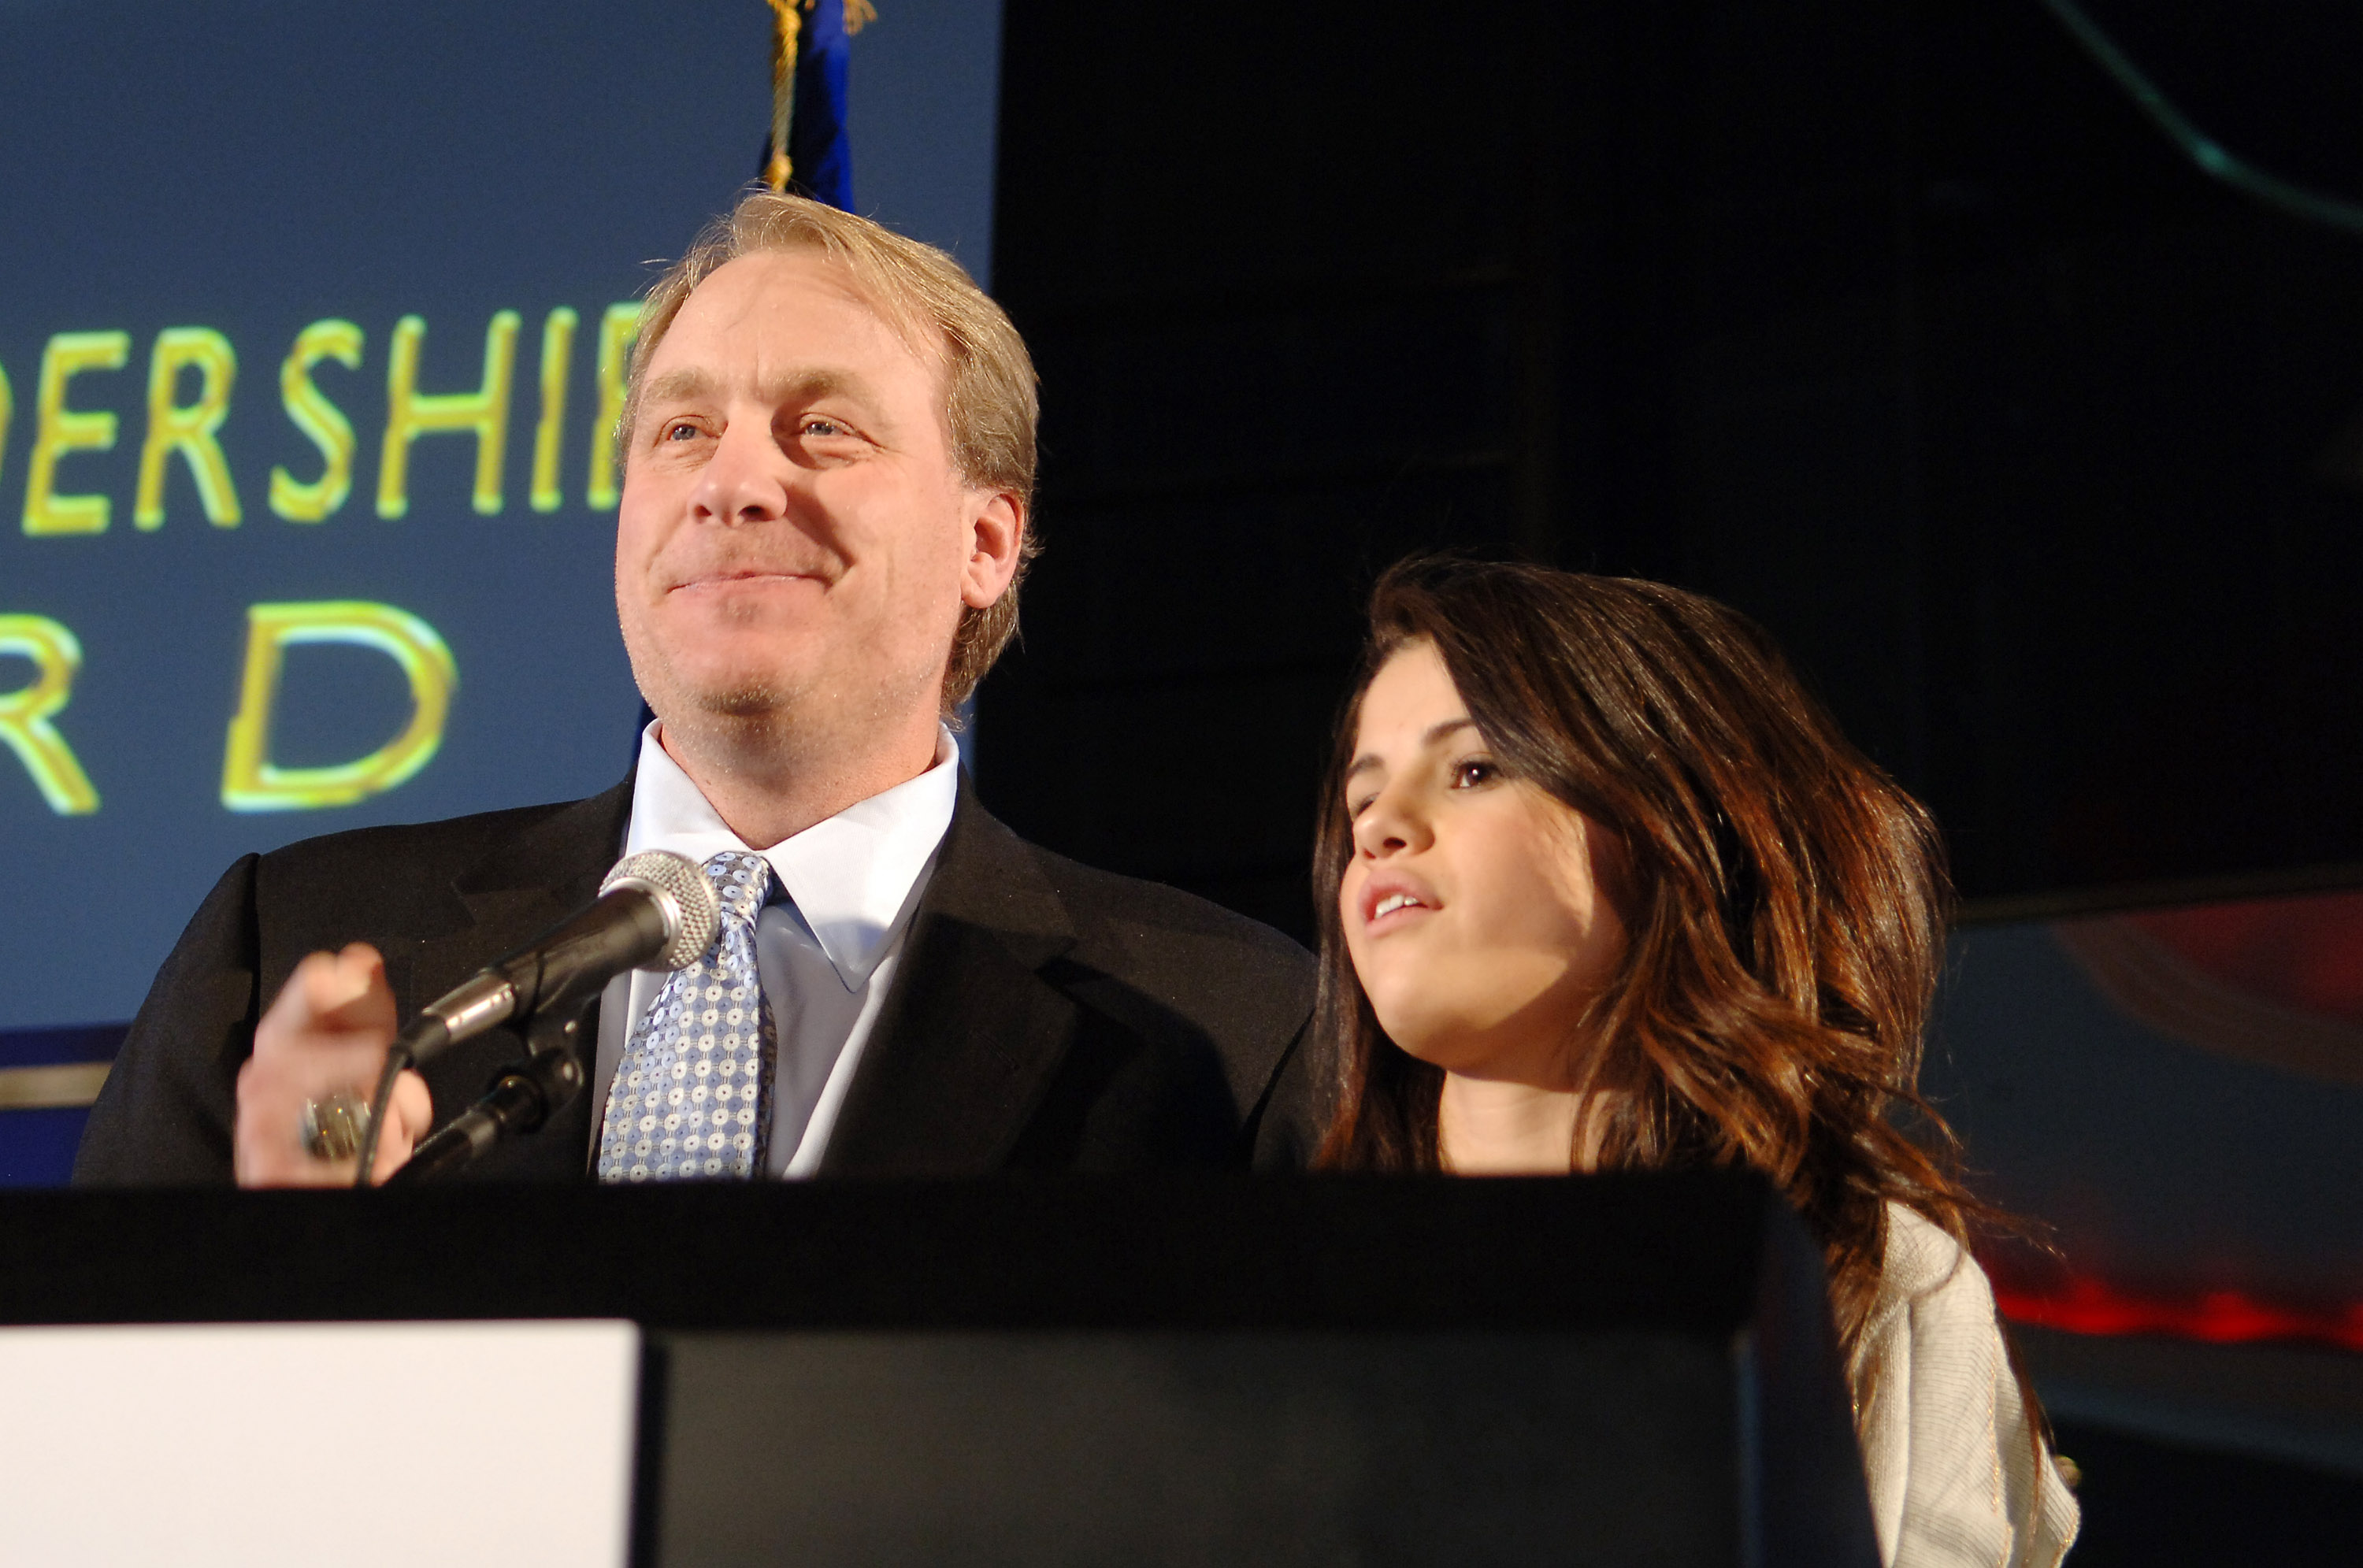 NEW YORK - NOVEMBER 12:  Baseball Player Curt Shilling and actress Selena Gomez speak at 'A Salute To Our troops' ceremony hosted by Microsoft Corporation and the United Service Organizations (USO) at Rockefeller Center's Rainbow Room on November 12, 2007